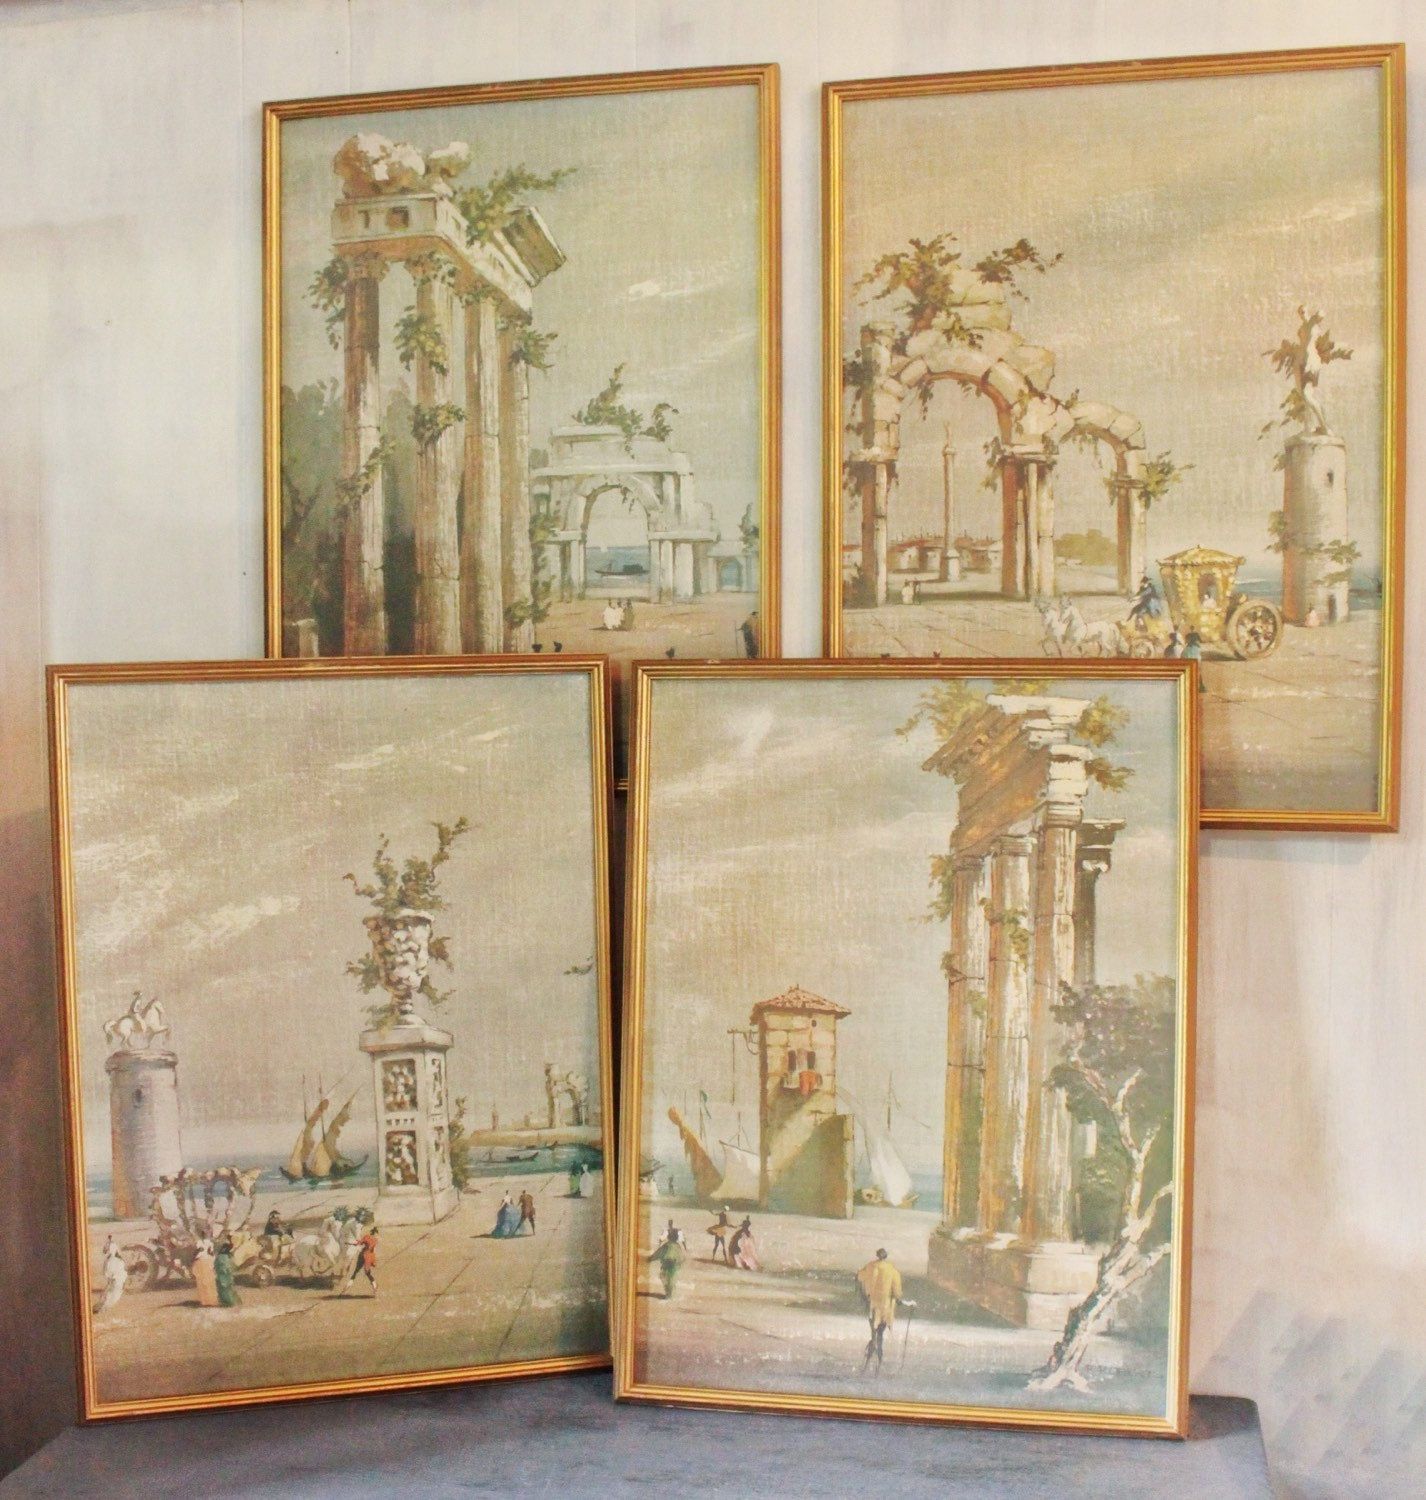 Large Framed Lithographs 1950s Italian Style Wall Decor Inside Italy Framed Art Prints (View 1 of 15)